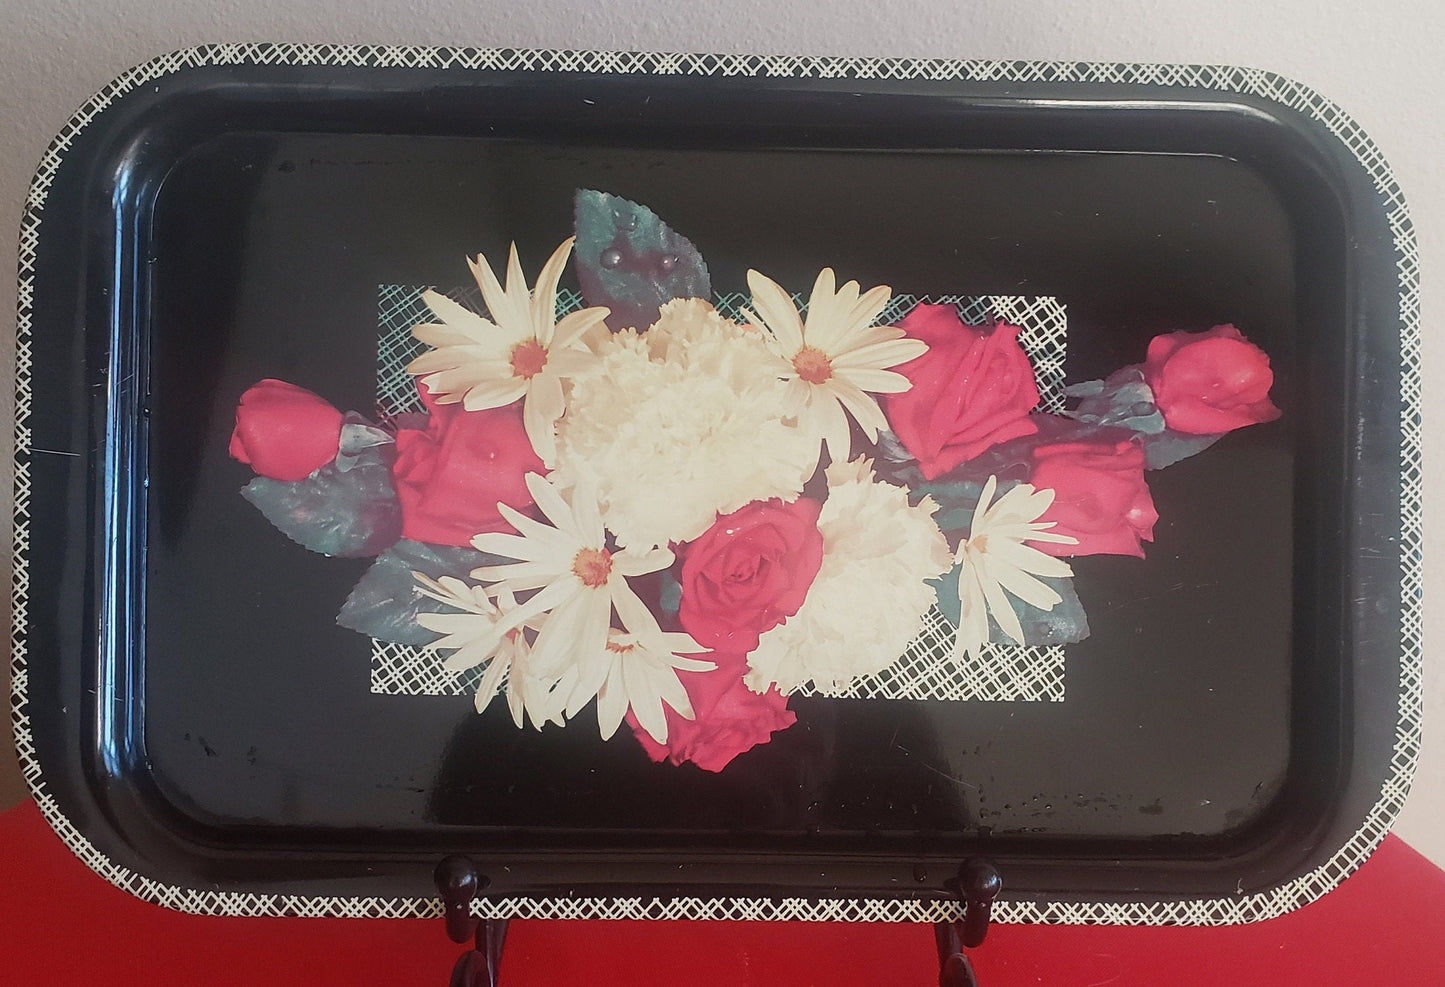 Vintage Metal Litho Lap/TV/Bed/Serving Tray Black with Carnations, Roses and Daisy's